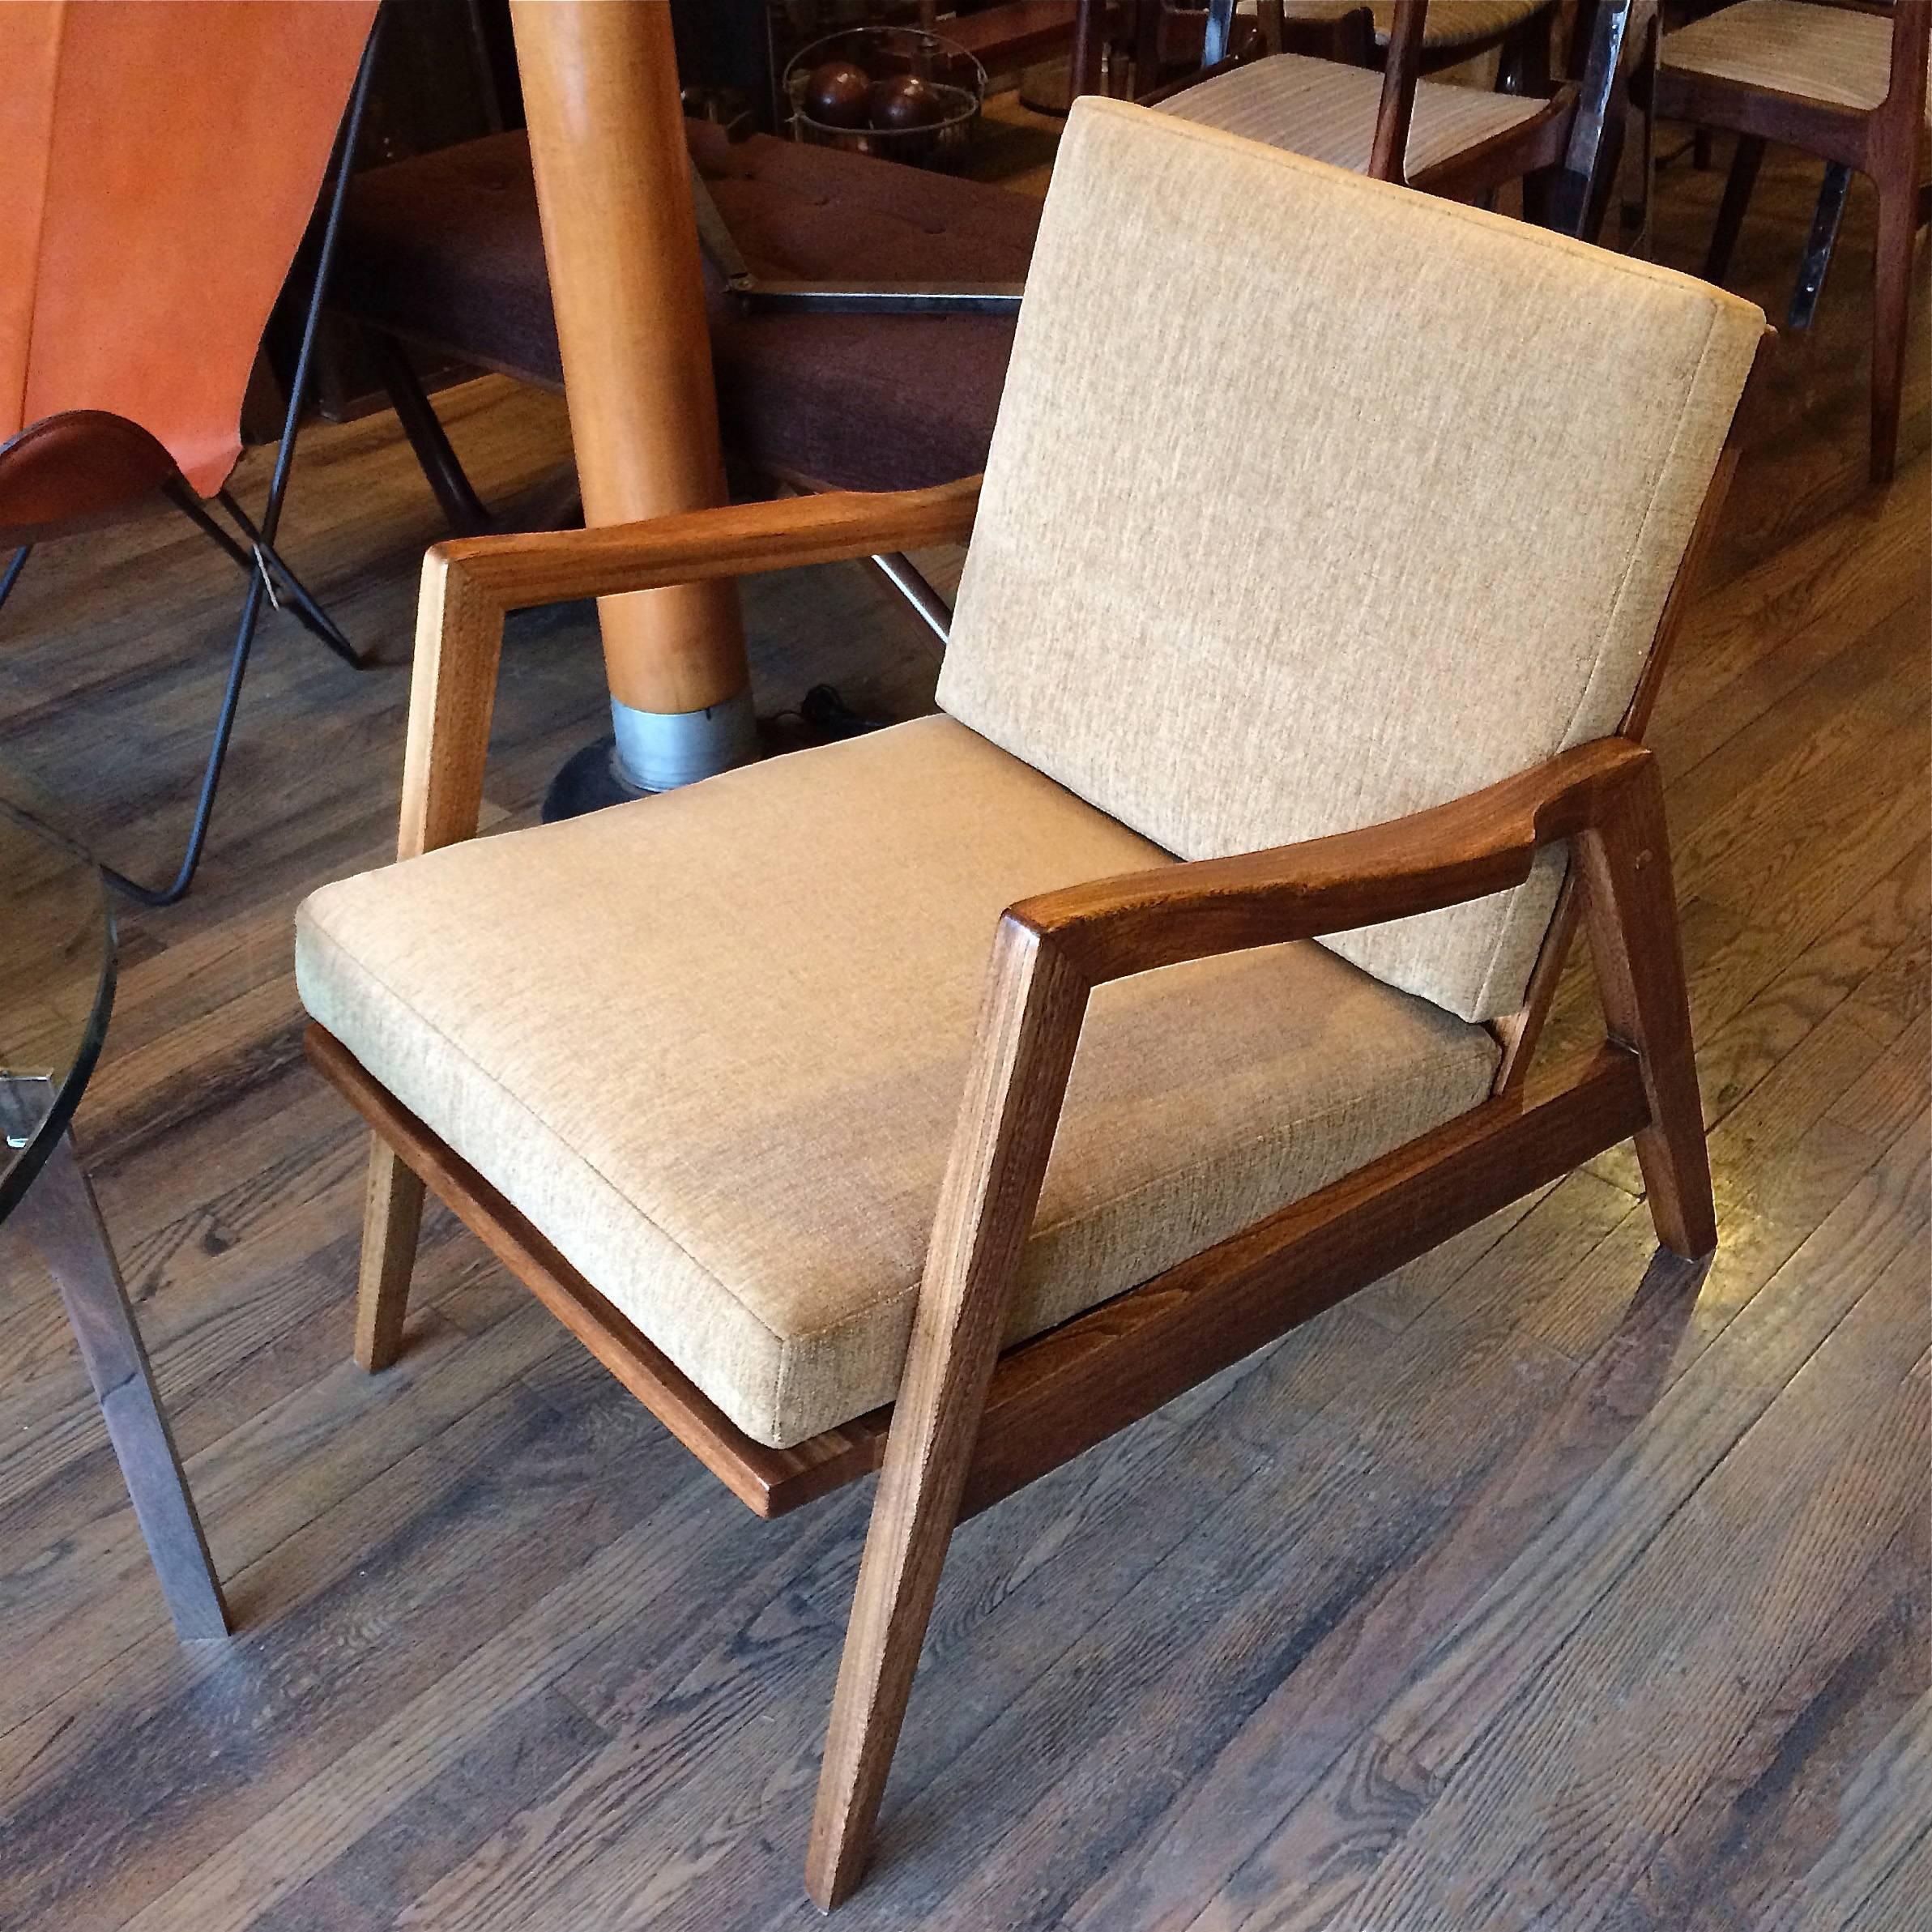 Handsome, Mid-Century Modern, lounge chair features a newly finished, nicely detailed, sculptural, birchwood frame and new cushions upholstered in tan chenille.